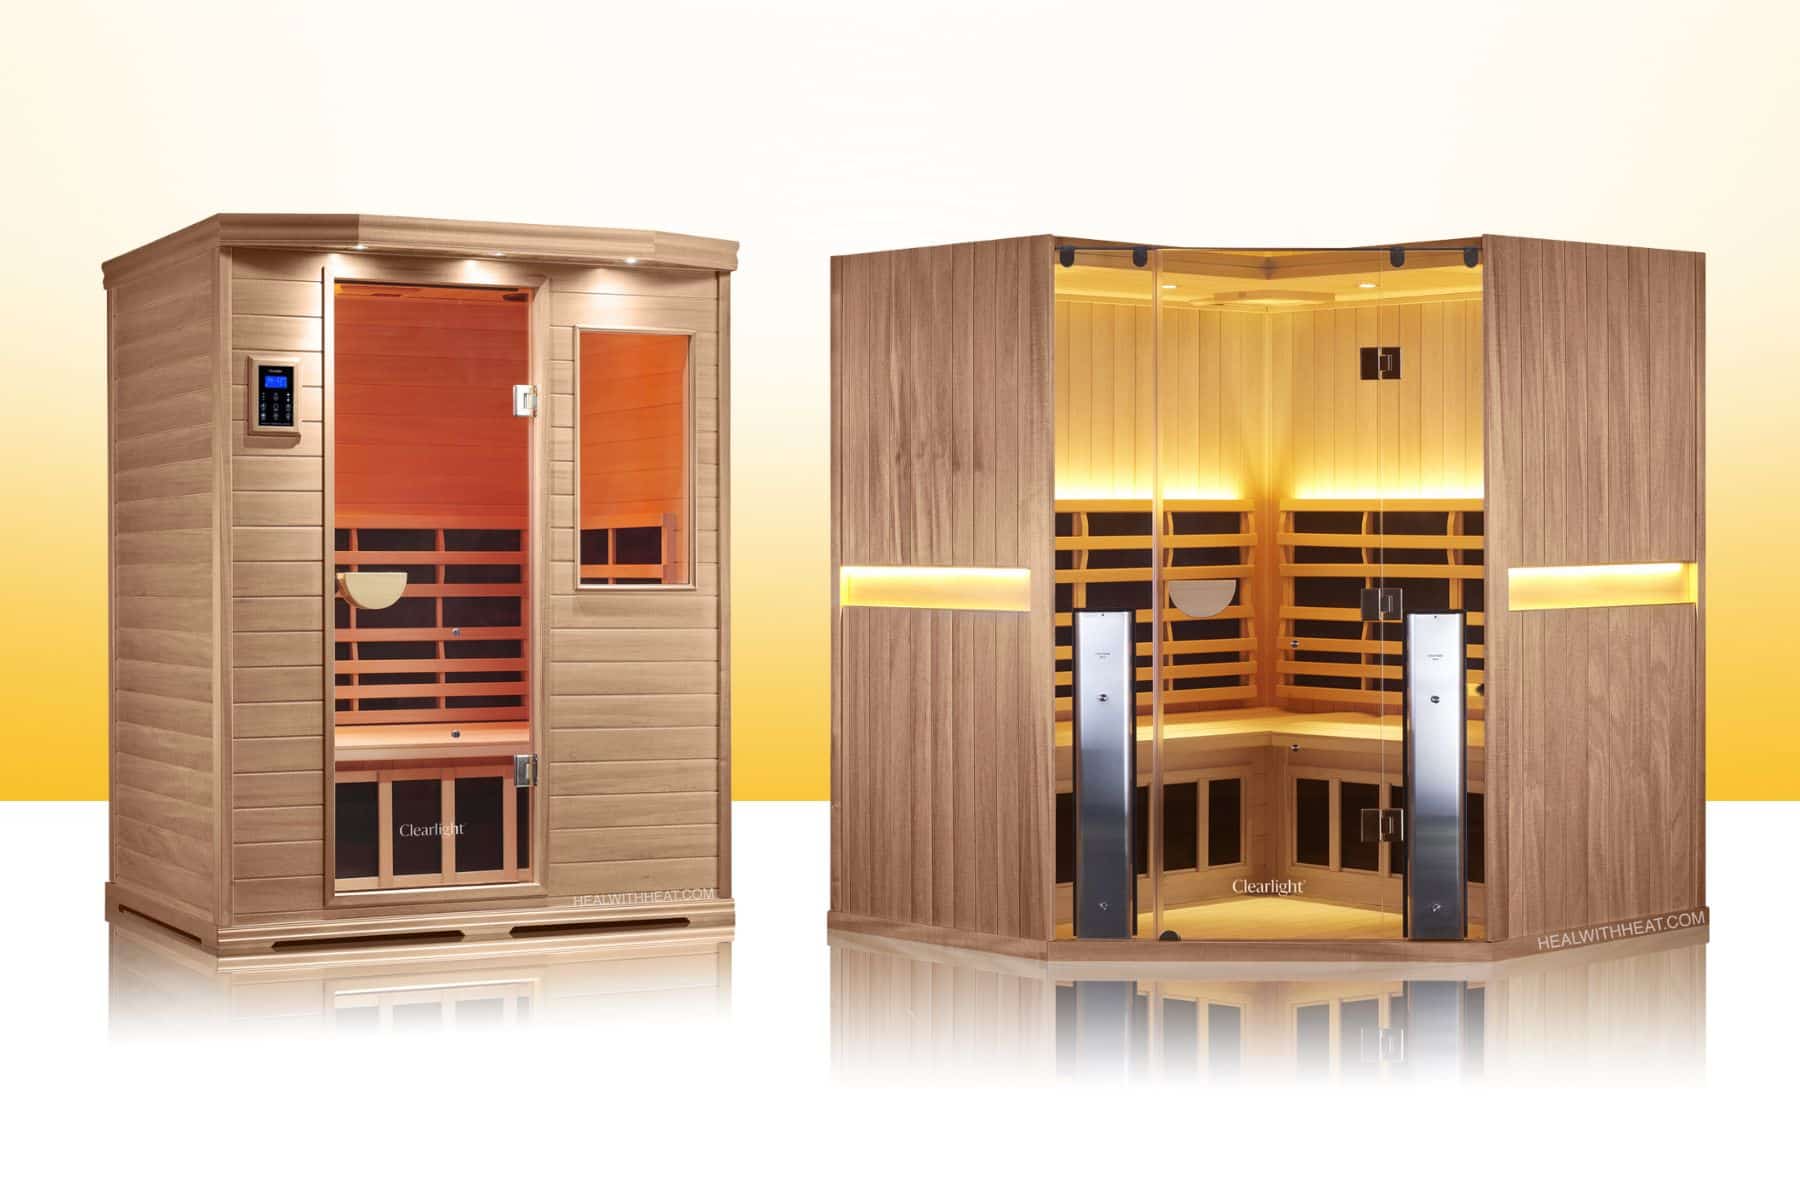 Clearlight Infrared Sauna Options